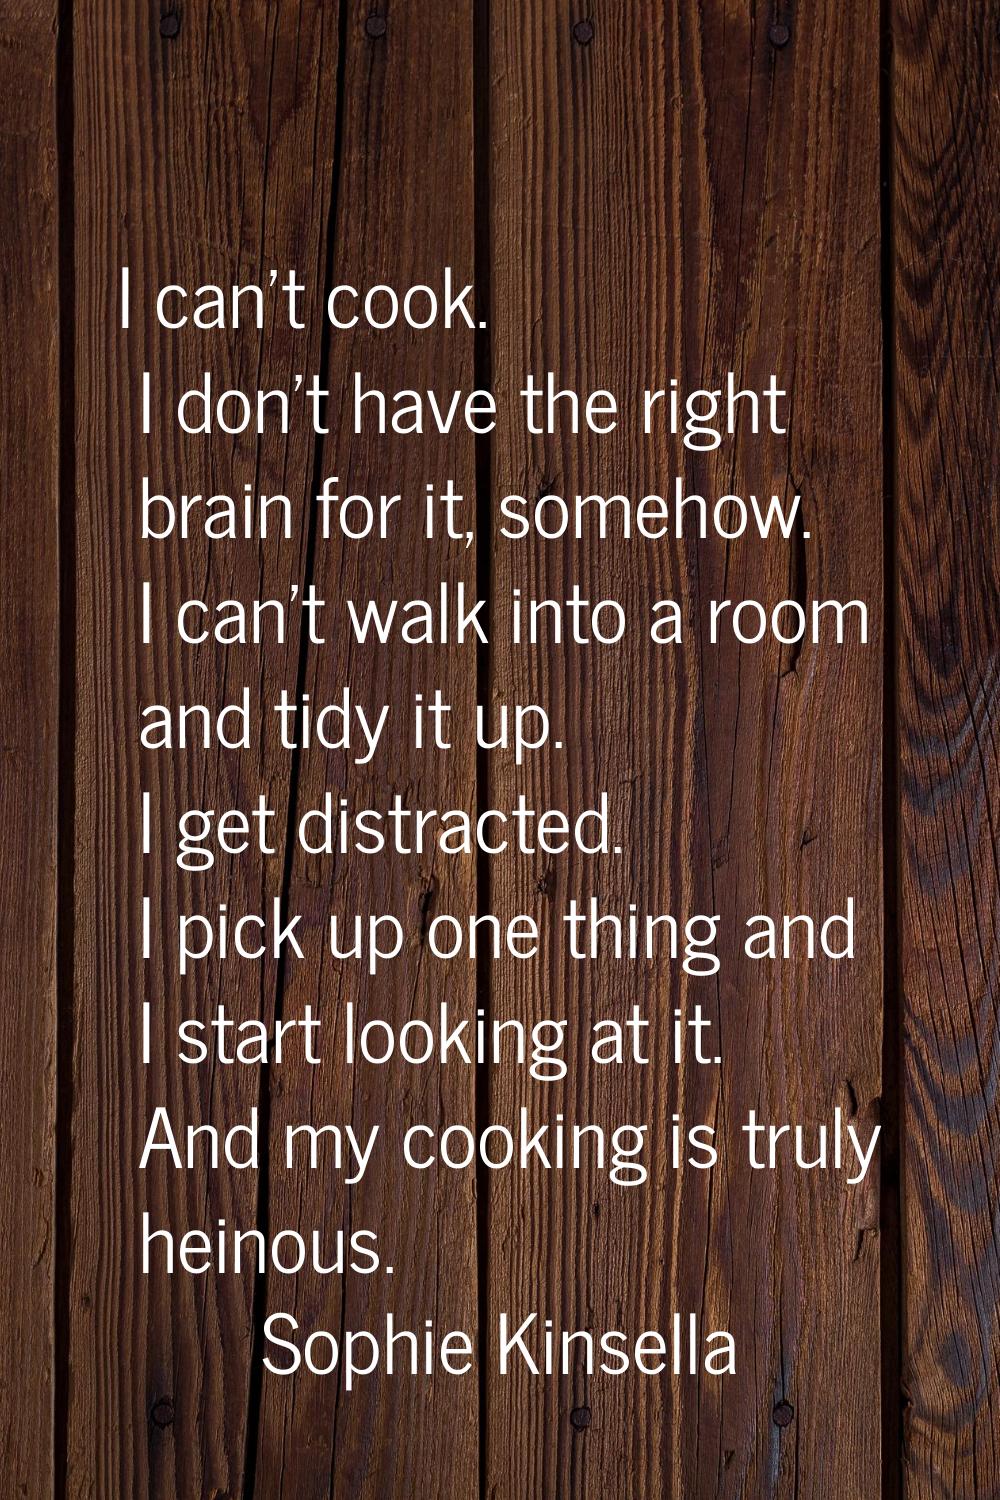 I can't cook. I don't have the right brain for it, somehow. I can't walk into a room and tidy it up